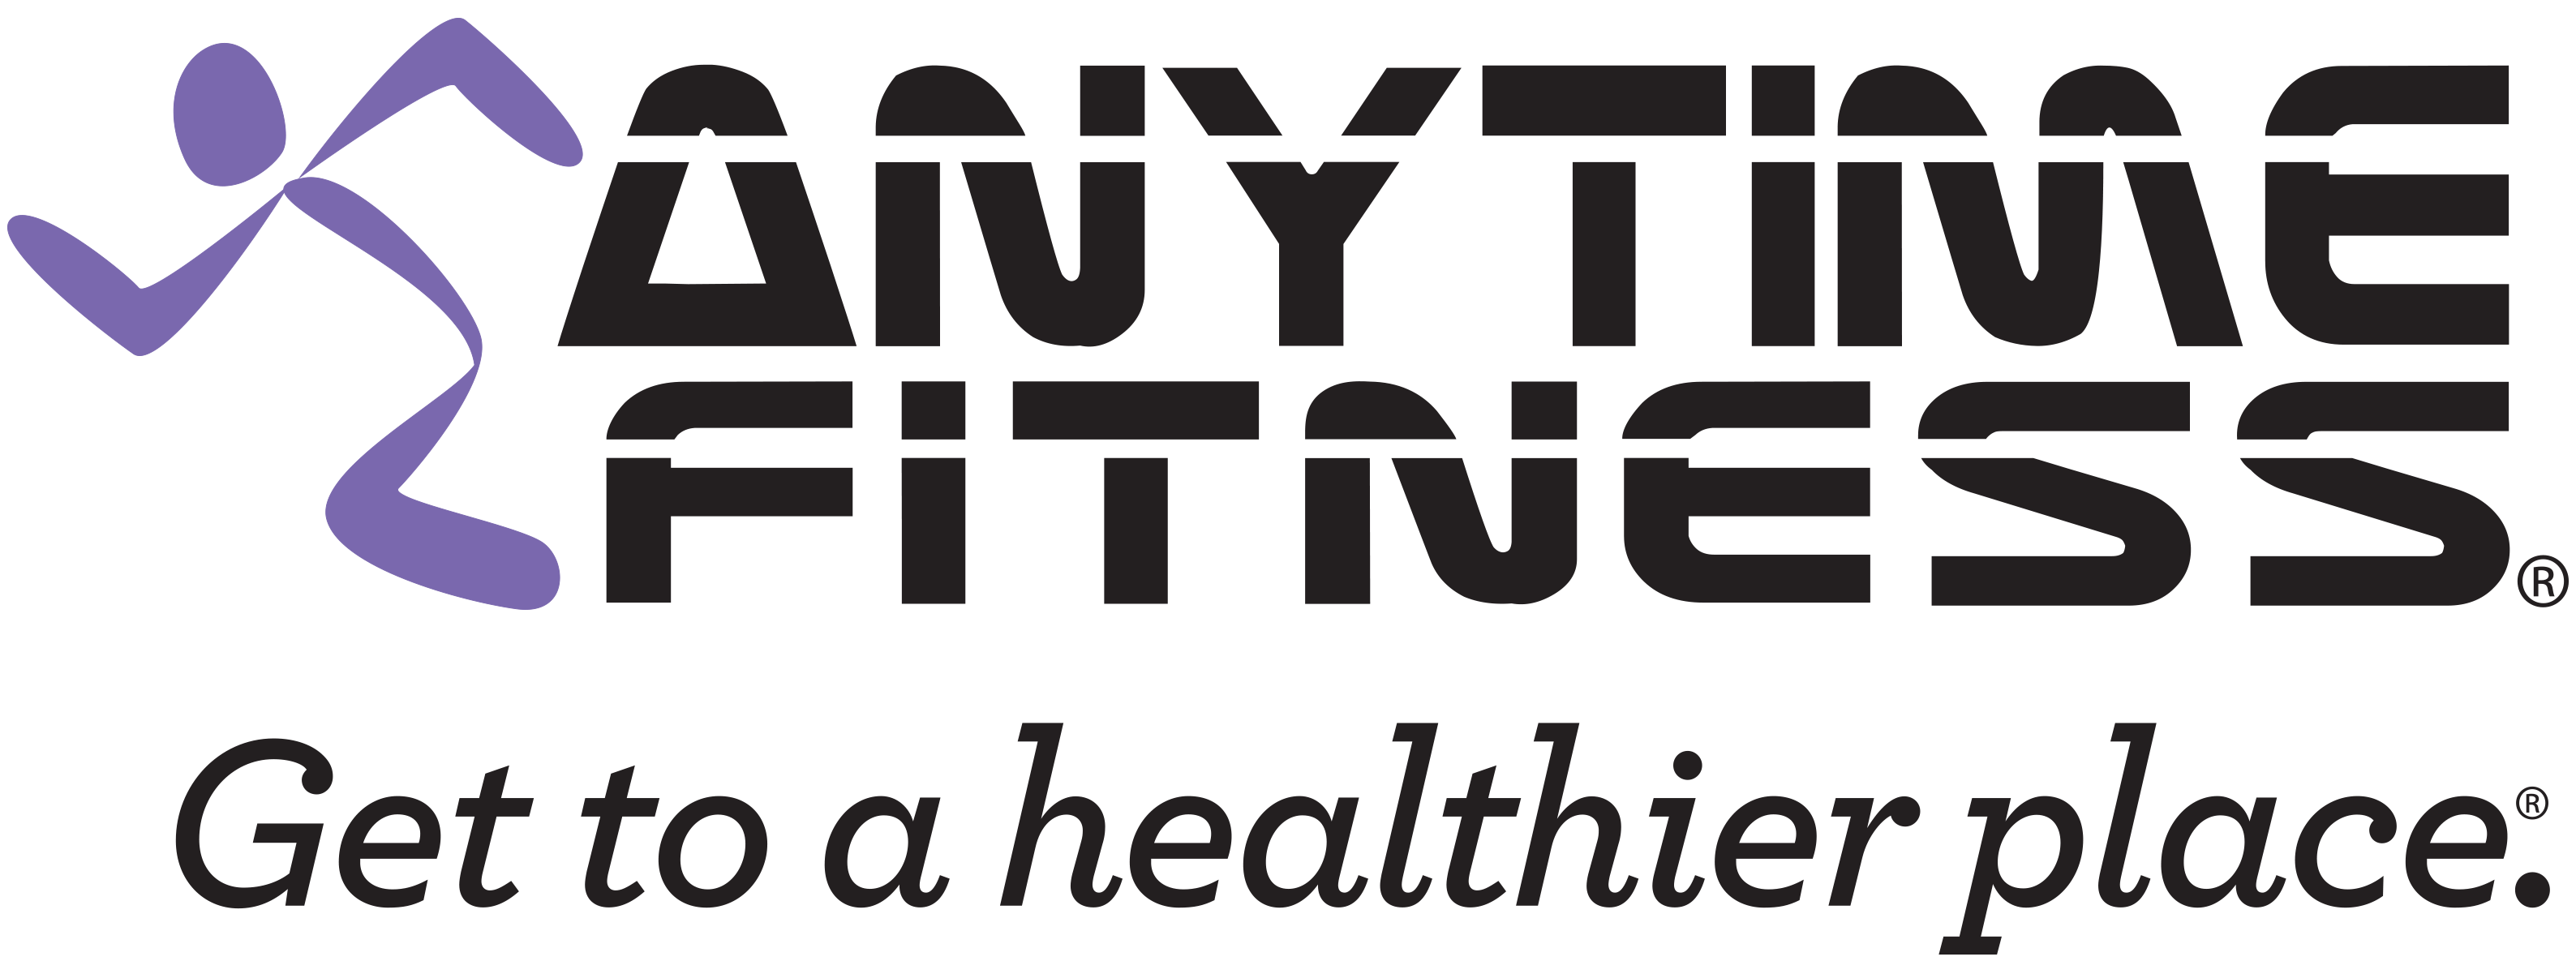 https://www.anytimefitness.com/wp-content/uploads/2016/02/AnytimeFitnessLogo-with-Tag.png